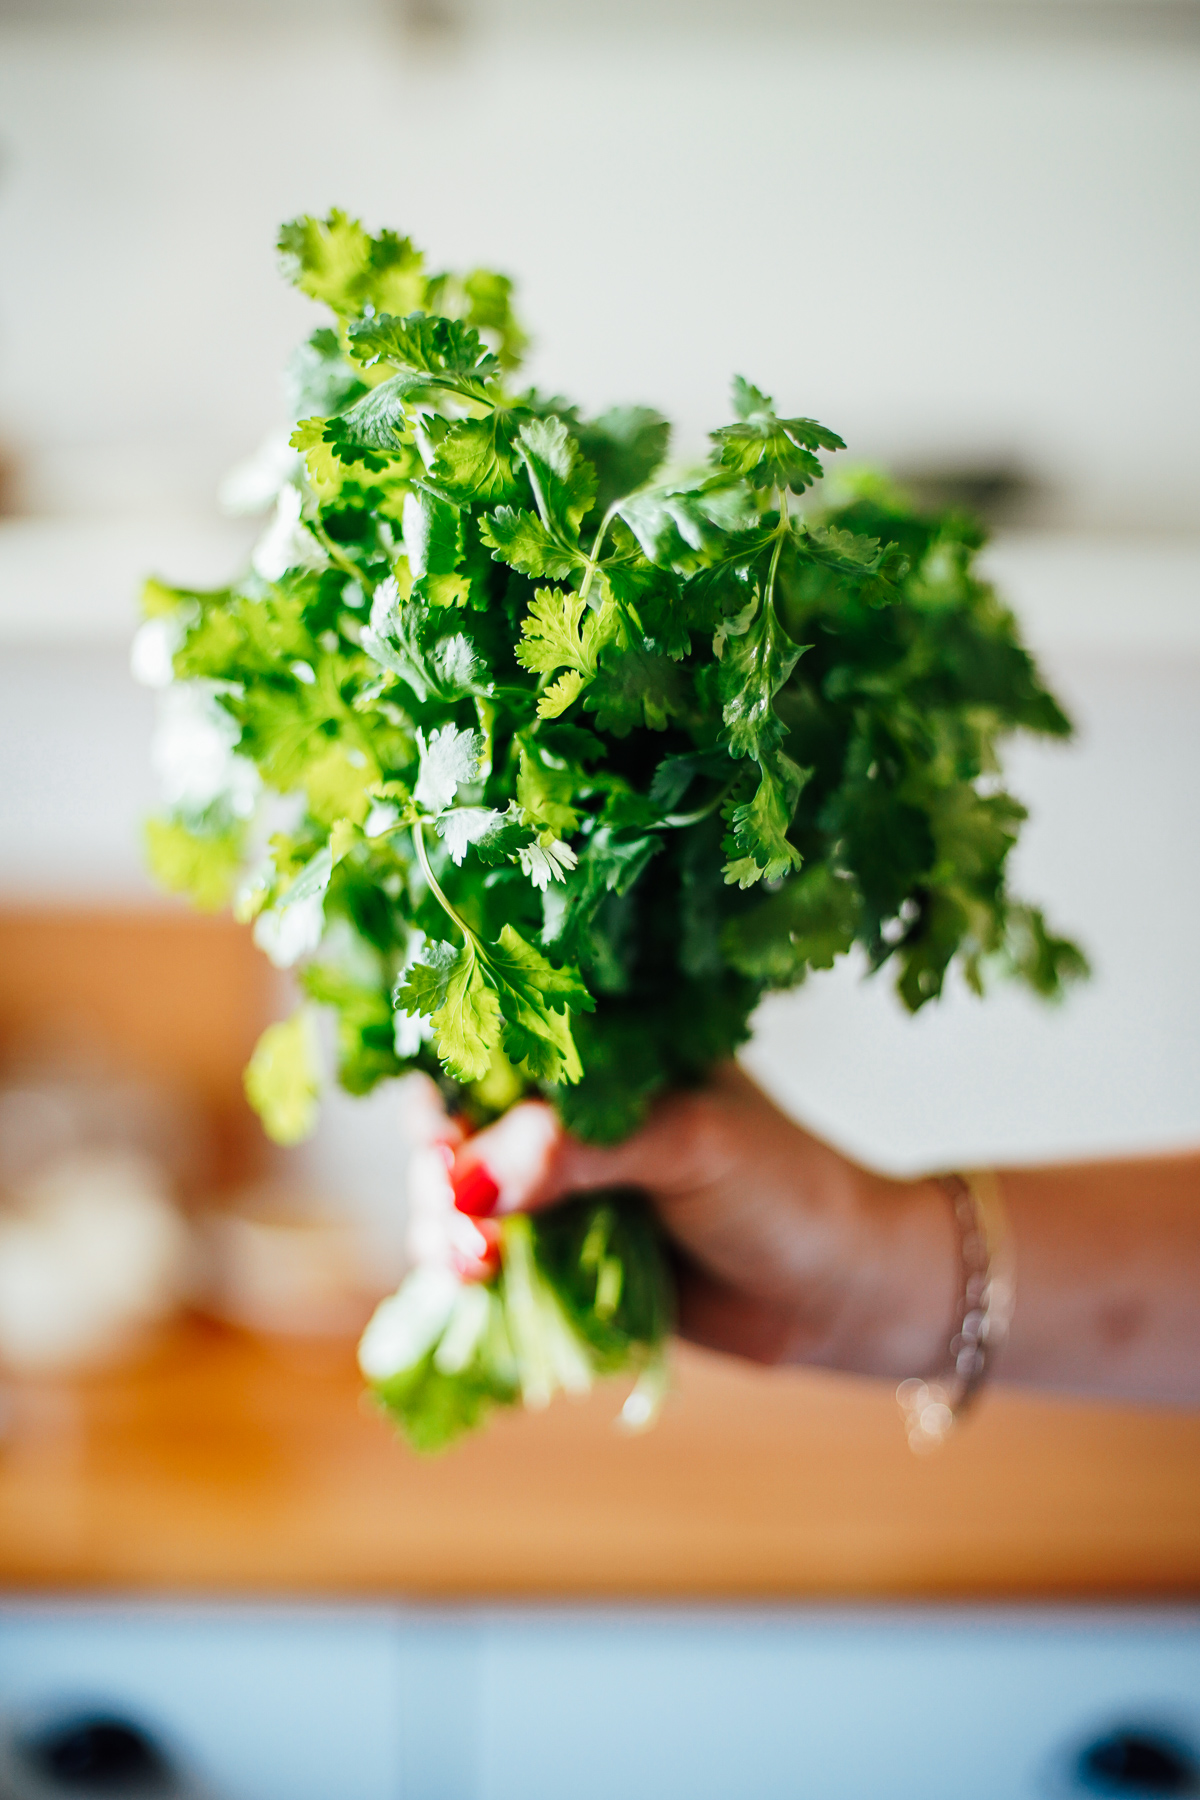 A bunch of cilantro being held in the kitchen.